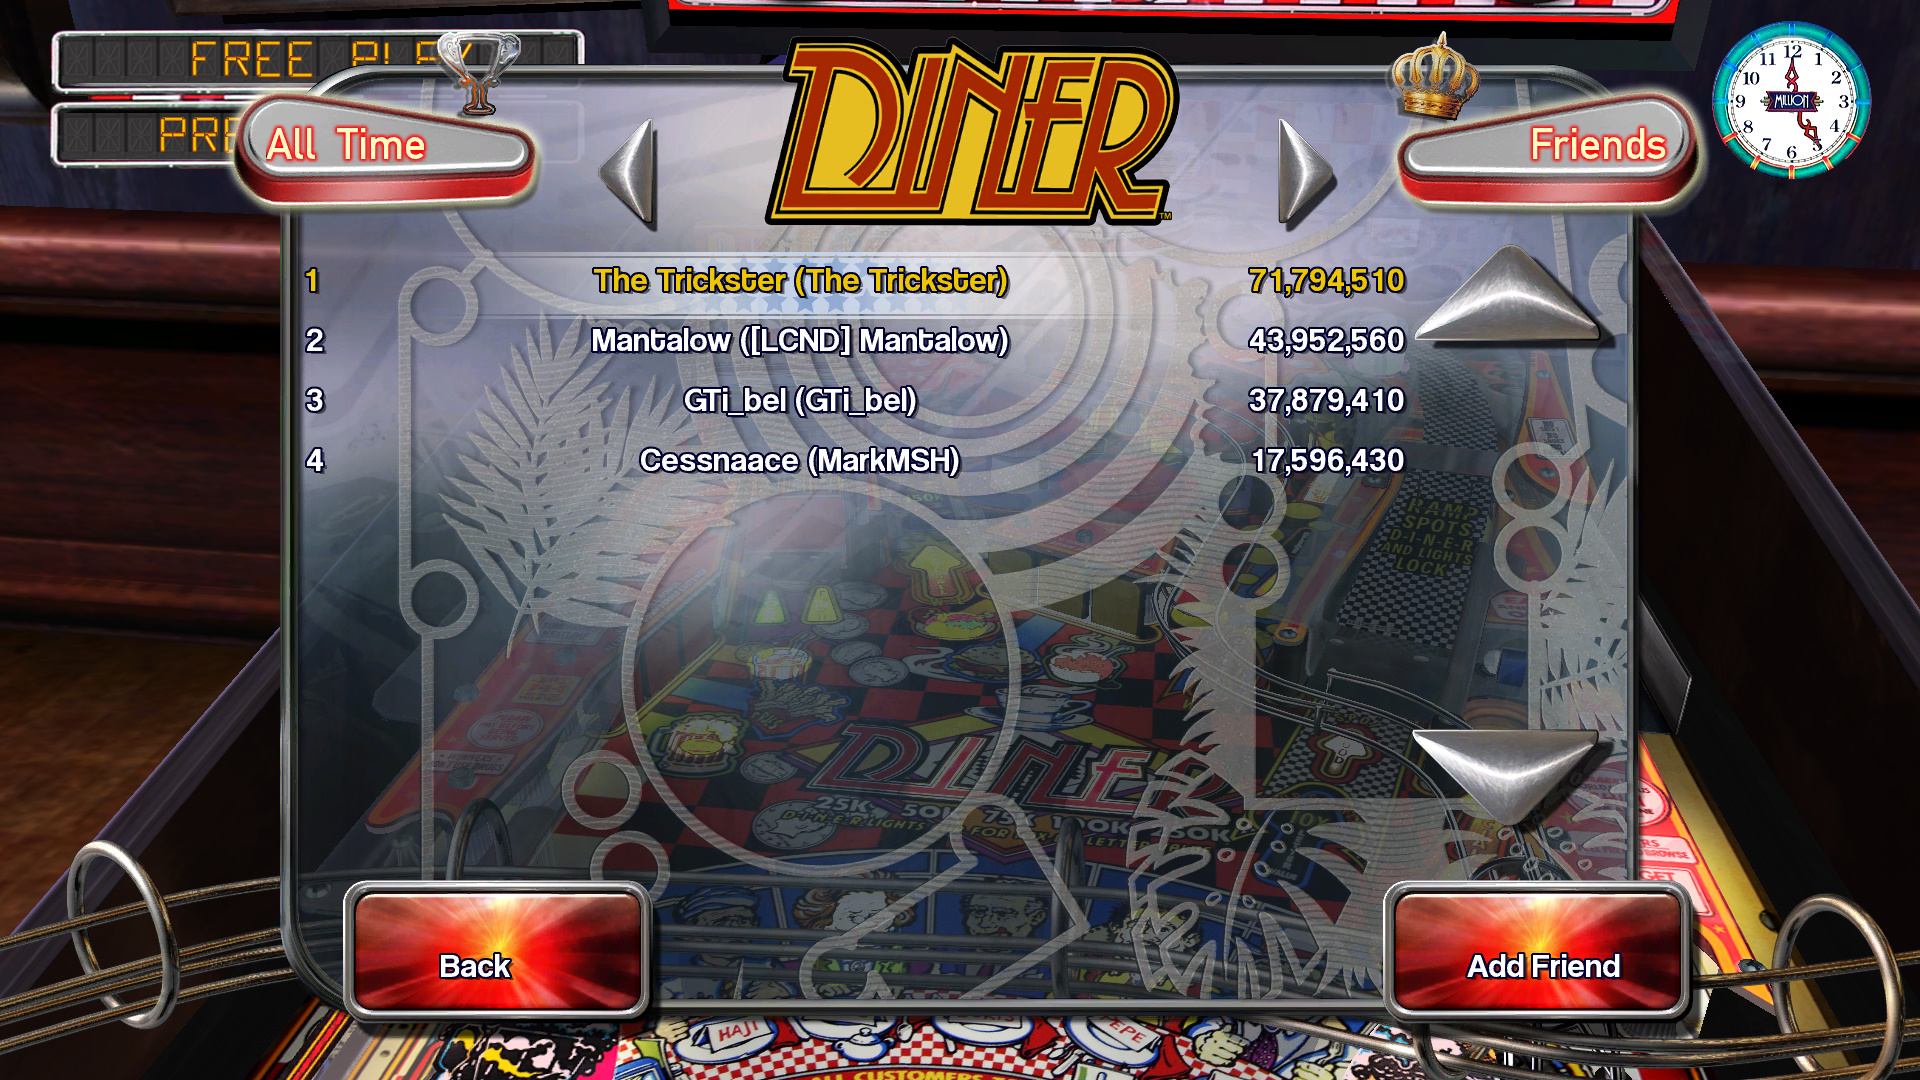 TheTrickster: Pinball Arcade: Diner (PC) 71,794,510 points on 2015-10-12 04:17:28